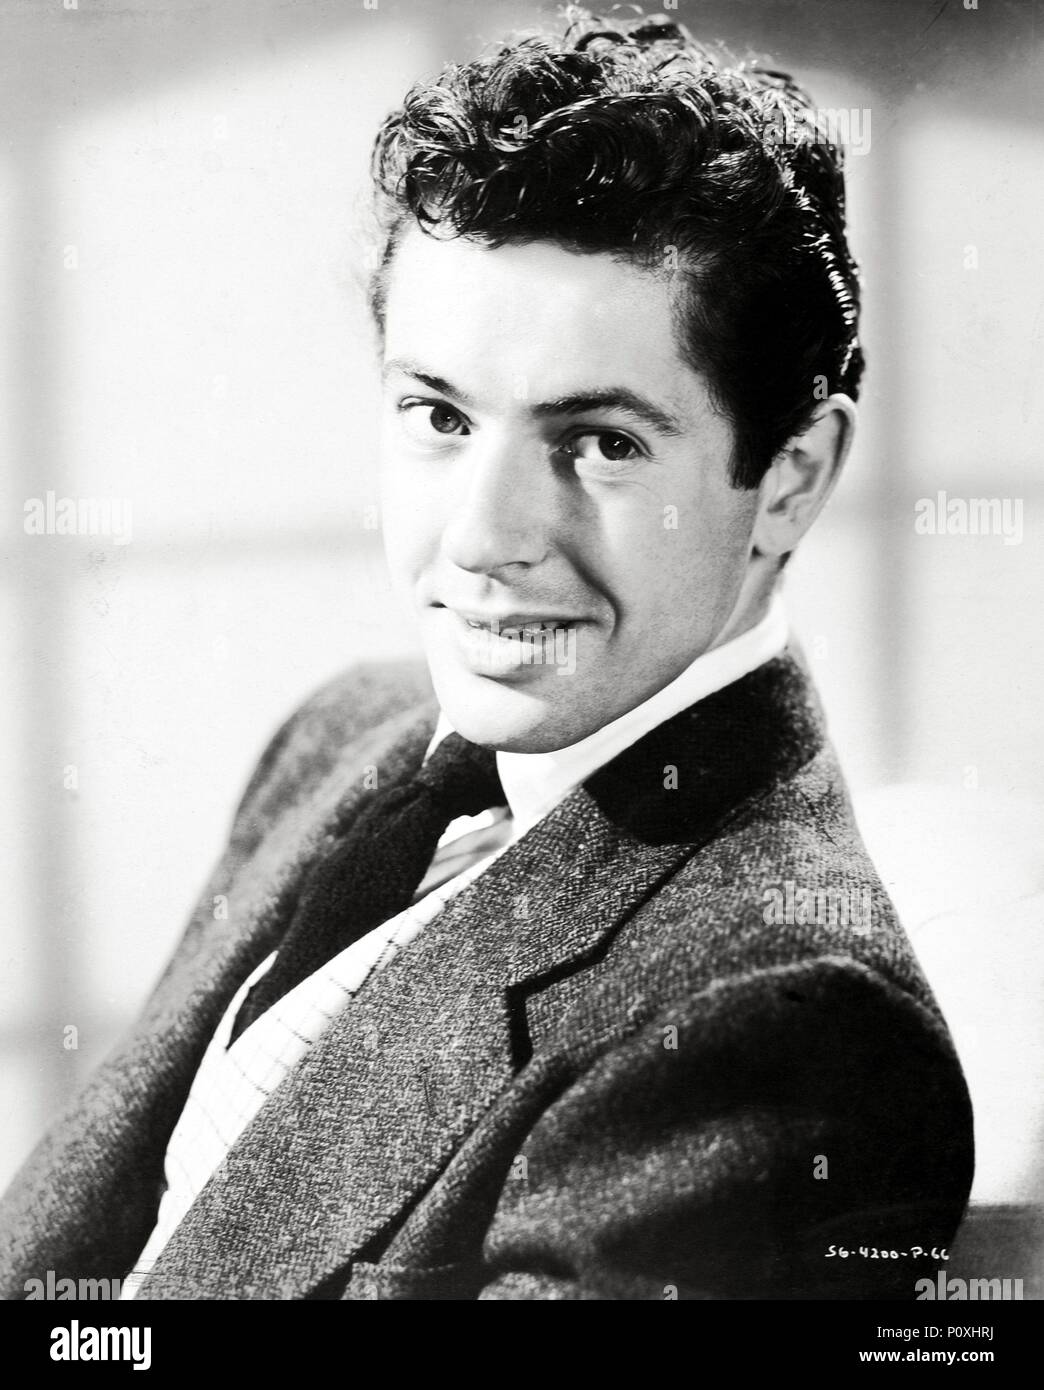 Original Film Title: I WANT YOU.  English Title: I WANT YOU.  Film Director: MARK ROBSON.  Year: 1951.  Stars: FARLEY GRANGER. Credit: RKO RADIO PICTURES / Album Stock Photo